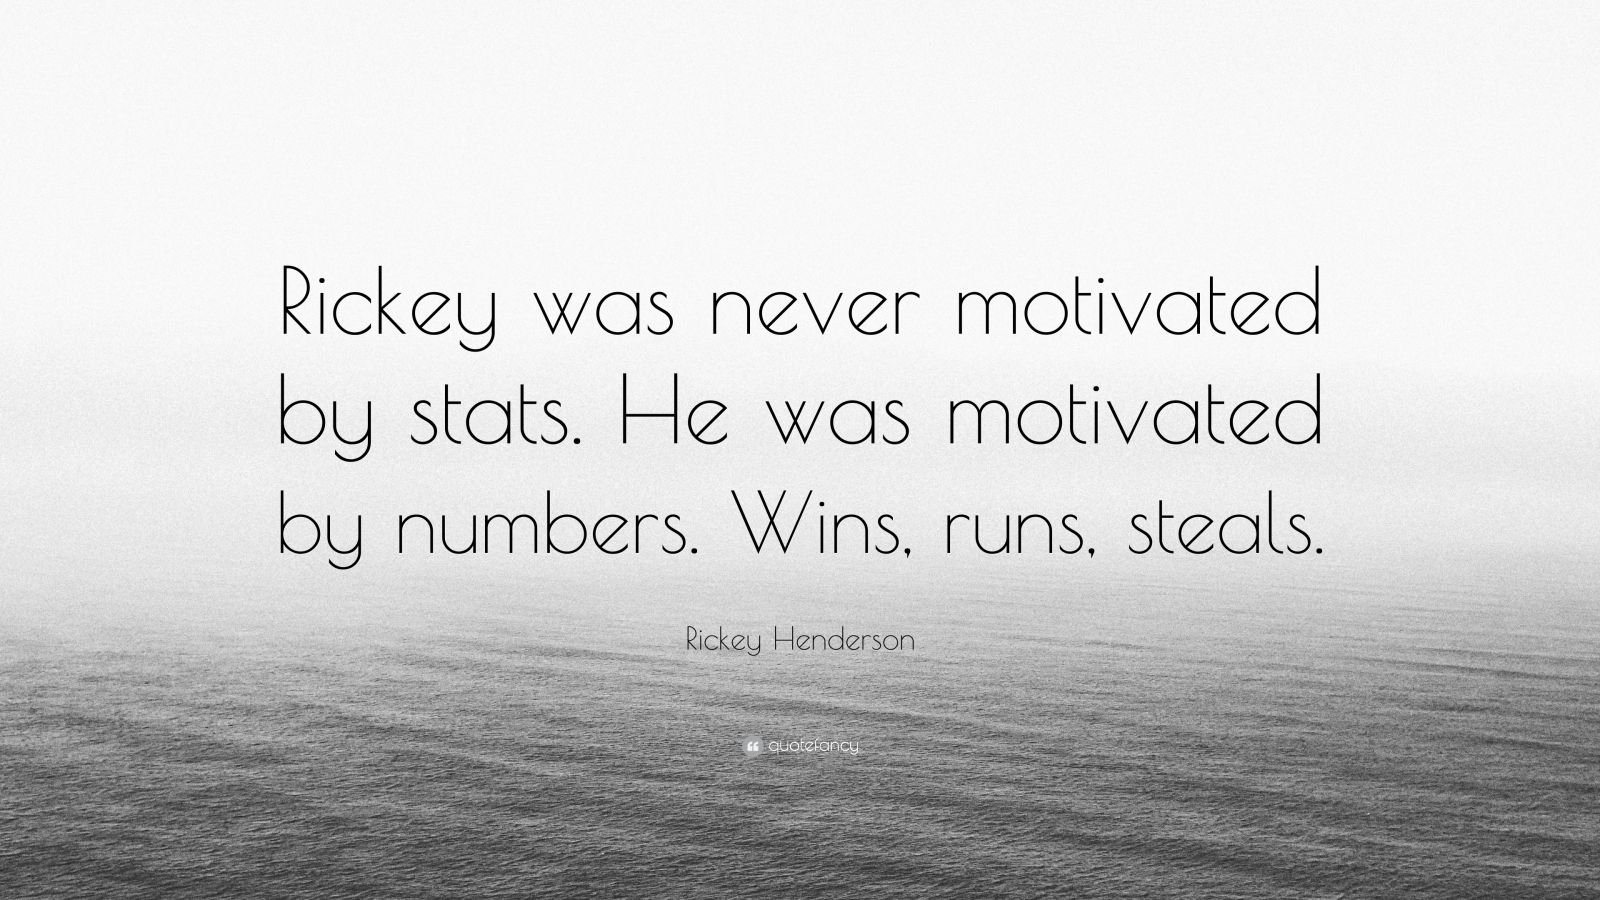 Rickey Henderson Quote: “Rickey was never motivated by stats. He was  motivated by numbers. Wins, runs, steals.”